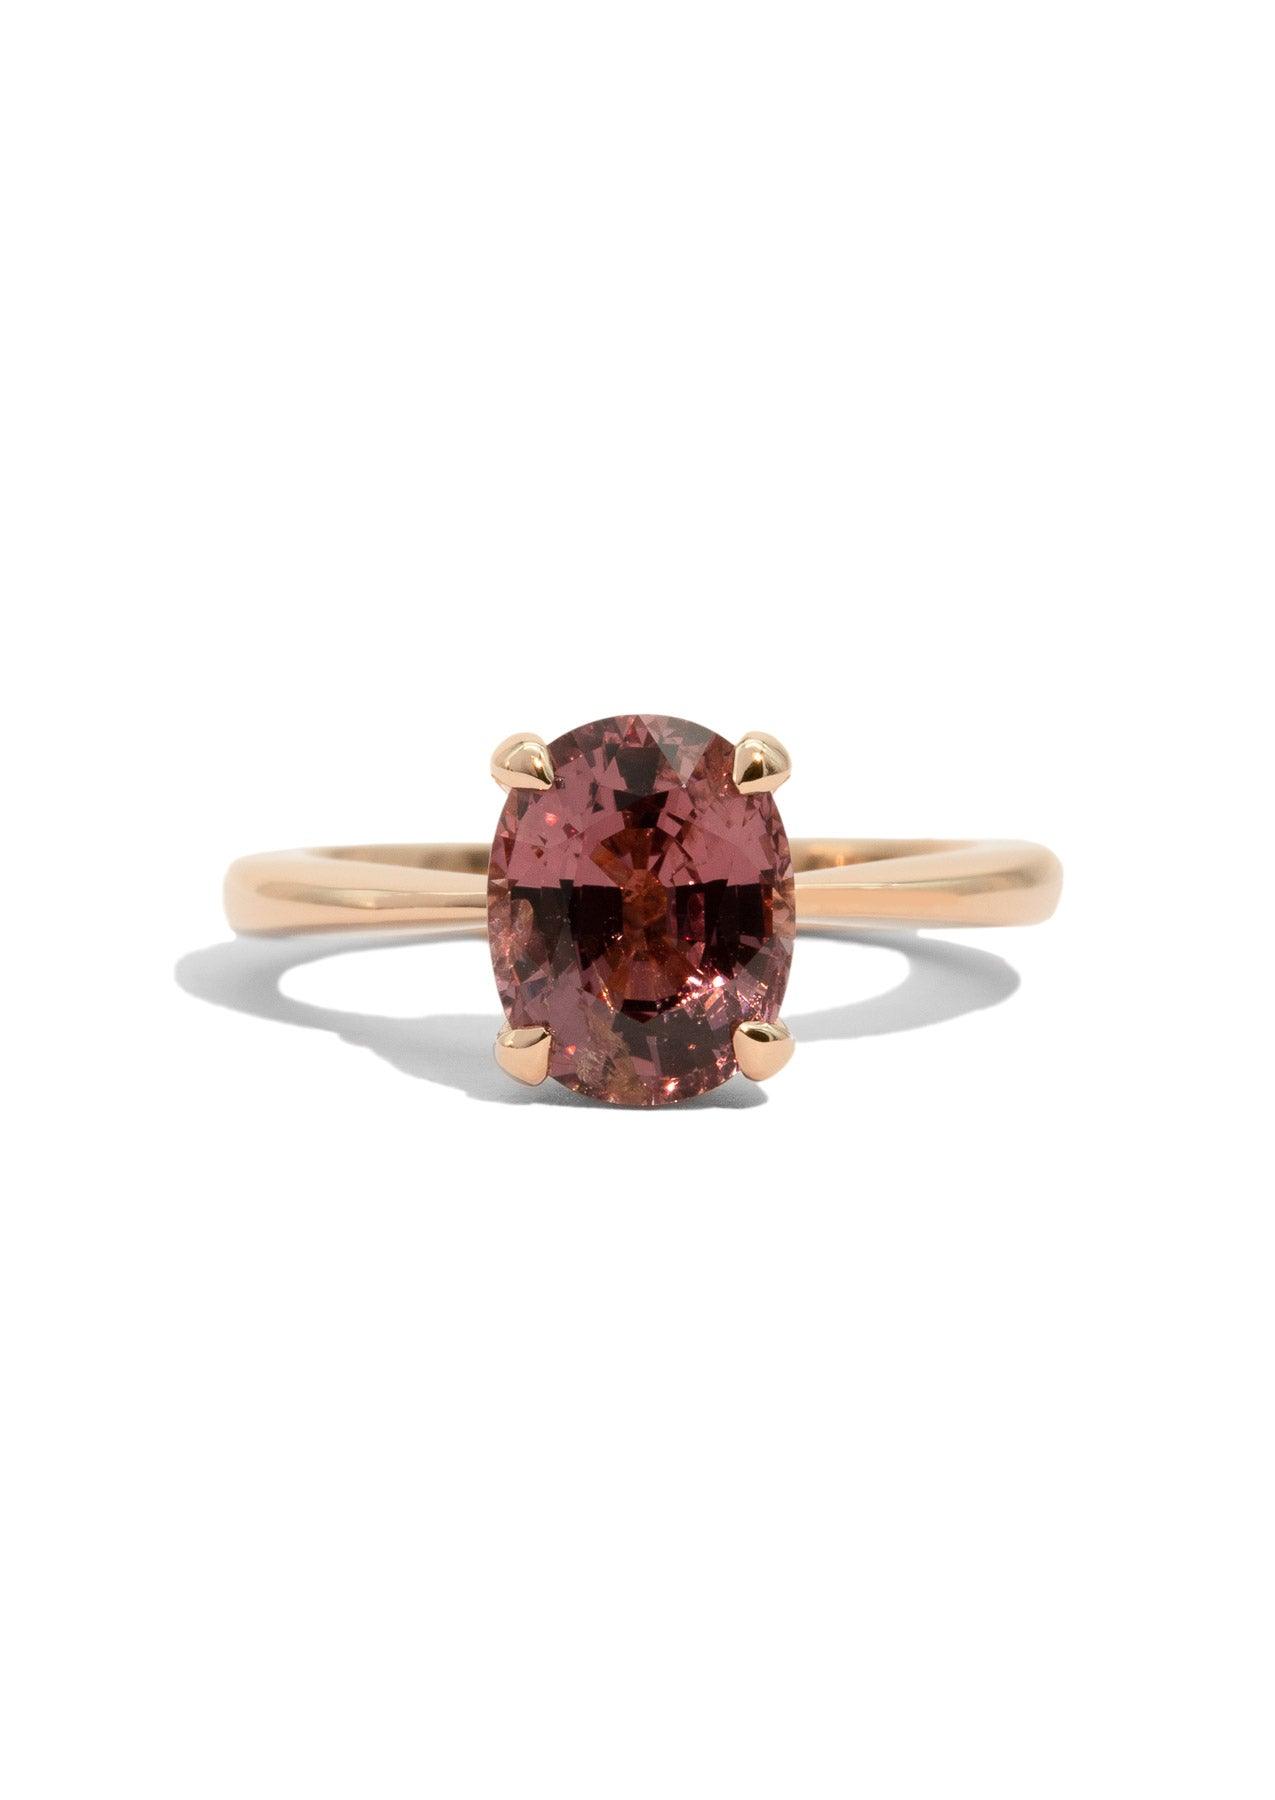 The June 2.95ct Cherry Spinel Ring